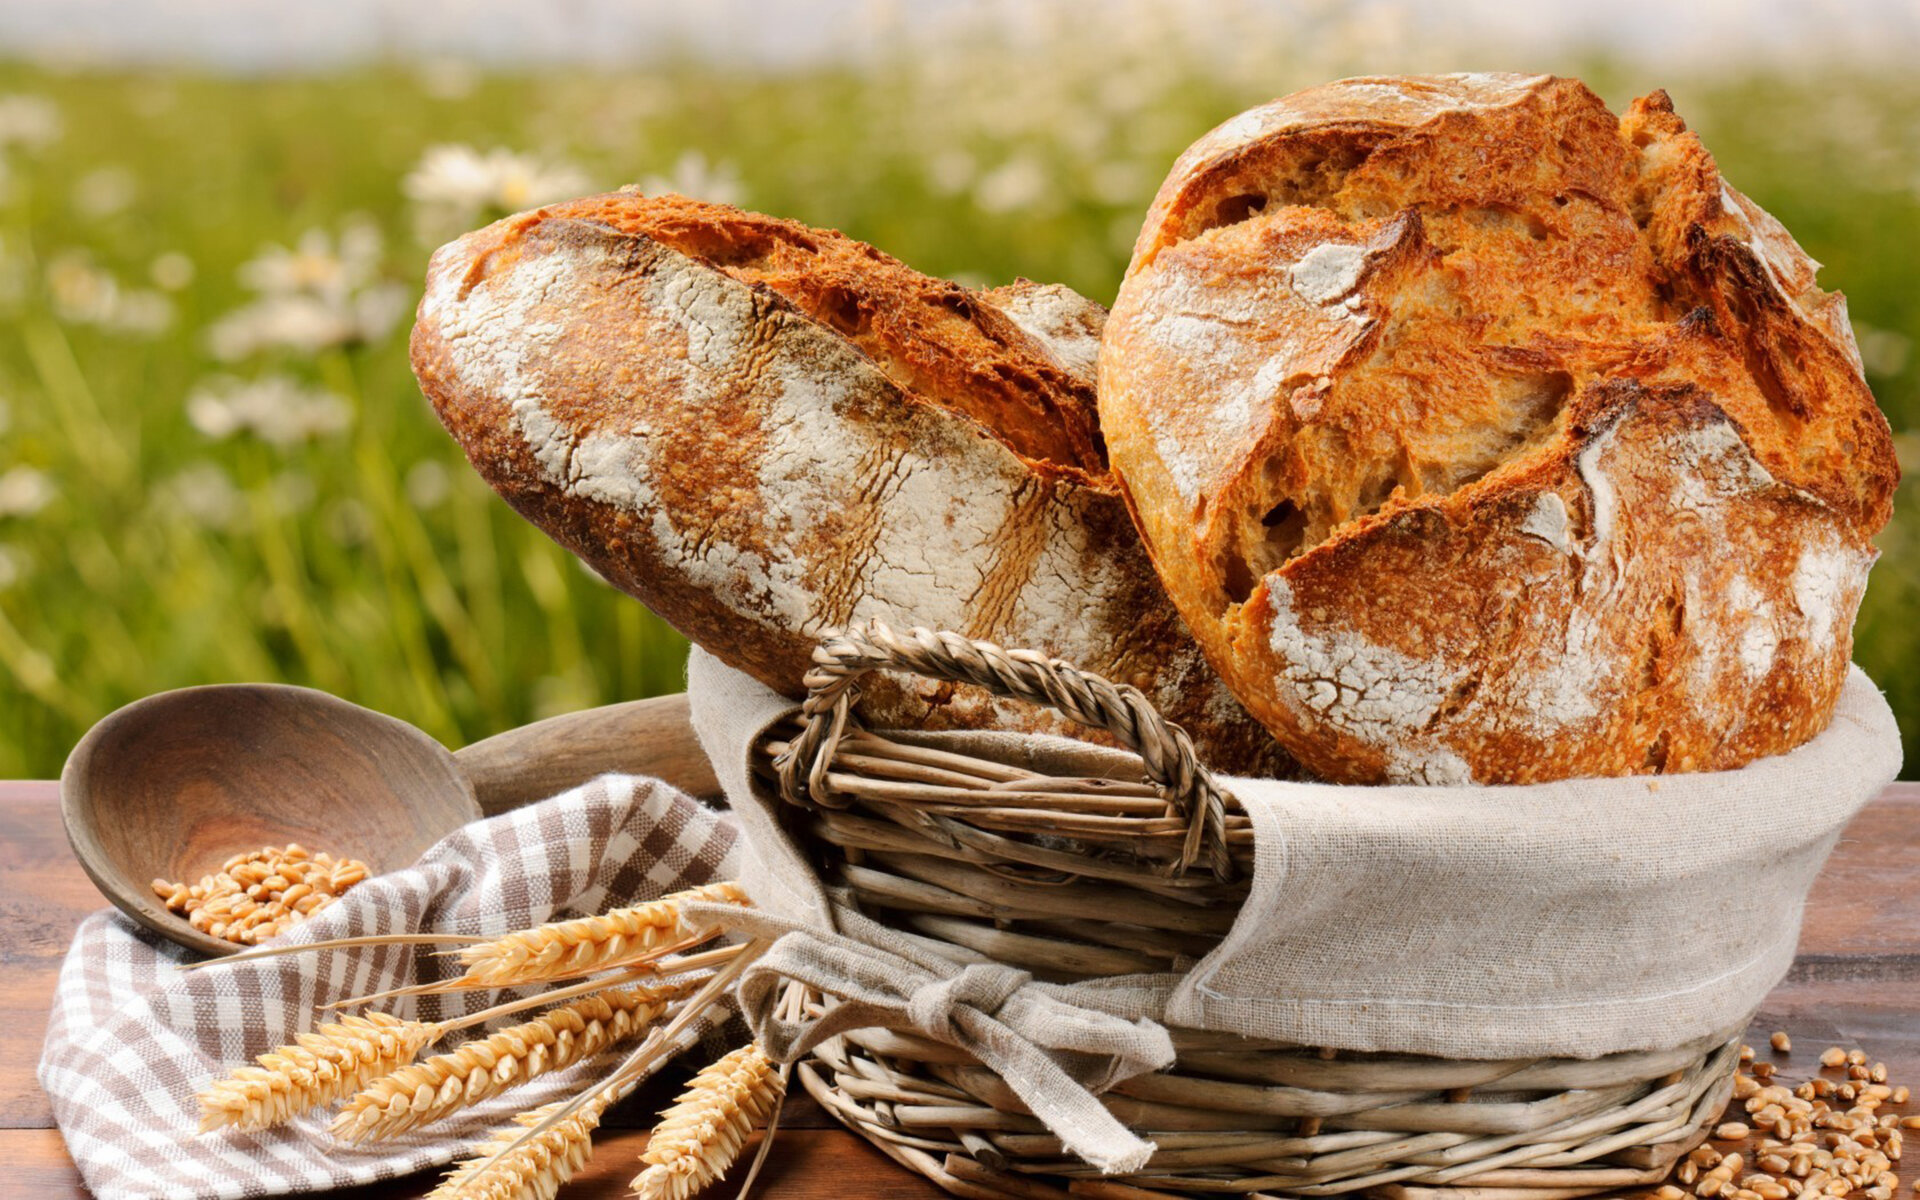 bread-pictures-37329-38187-hd-wallpapers-3-e1459420403462